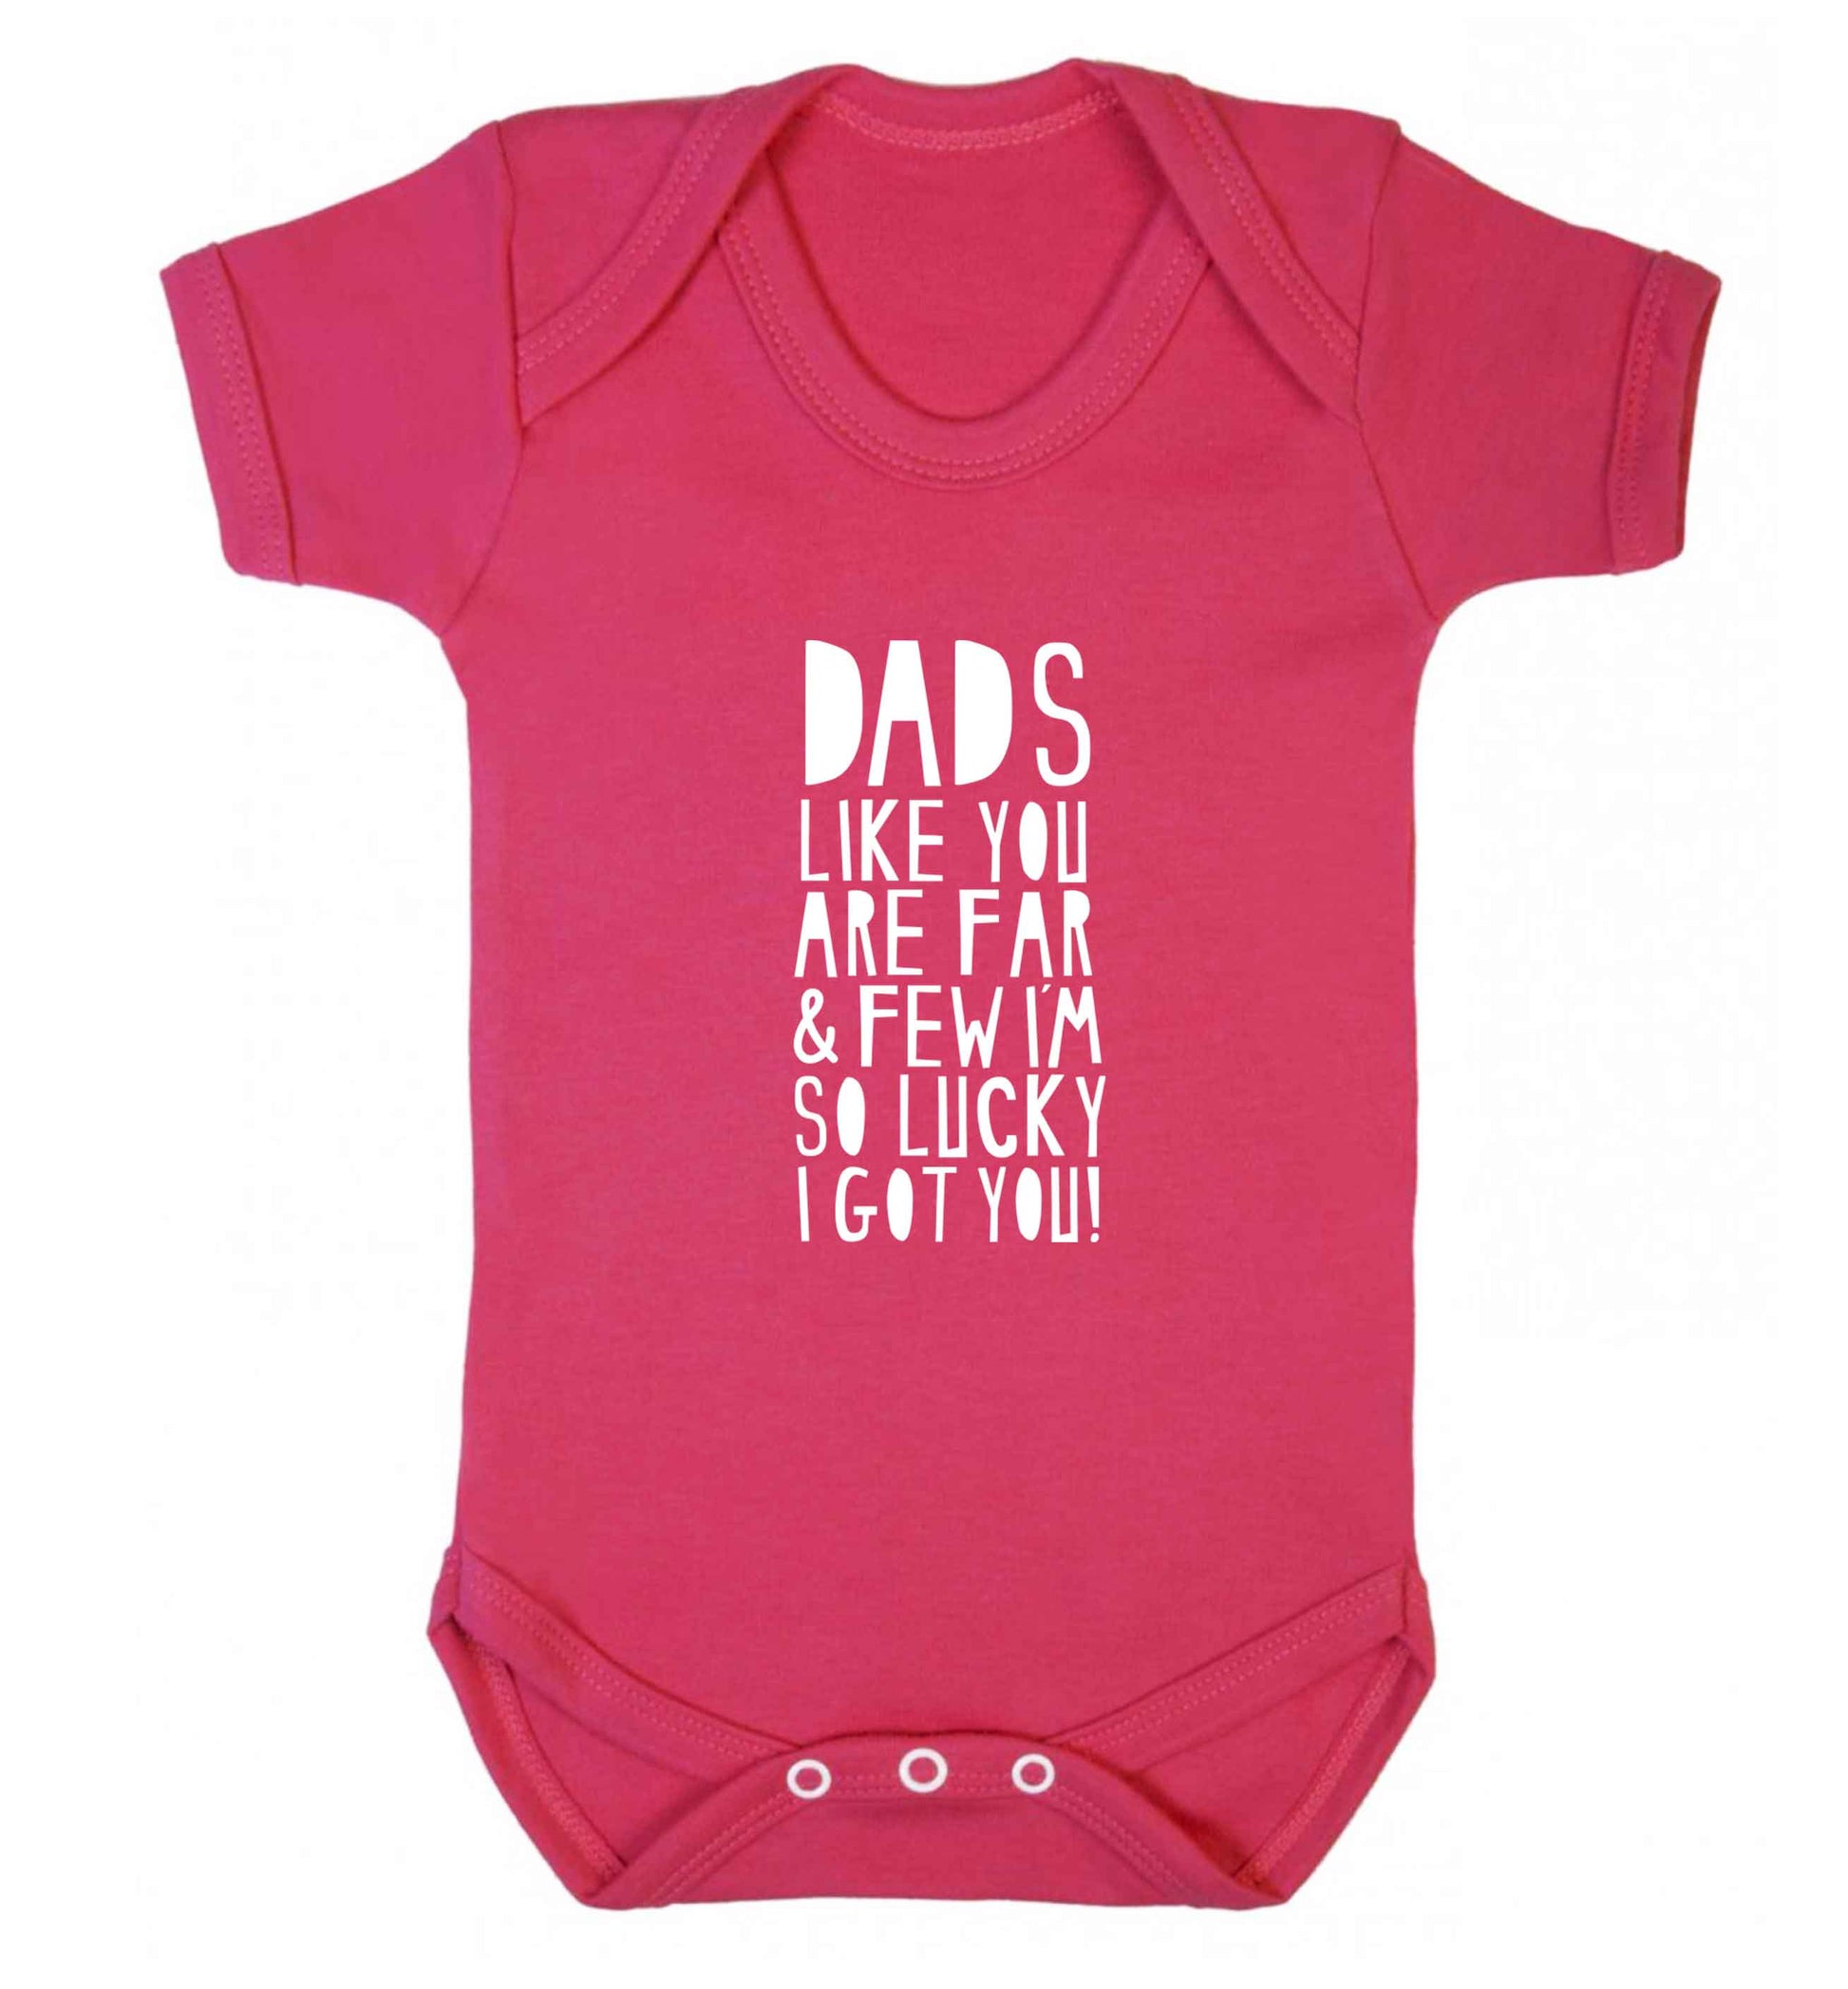 Dads like you are far and few I'm so luck I got you! baby vest dark pink 18-24 months